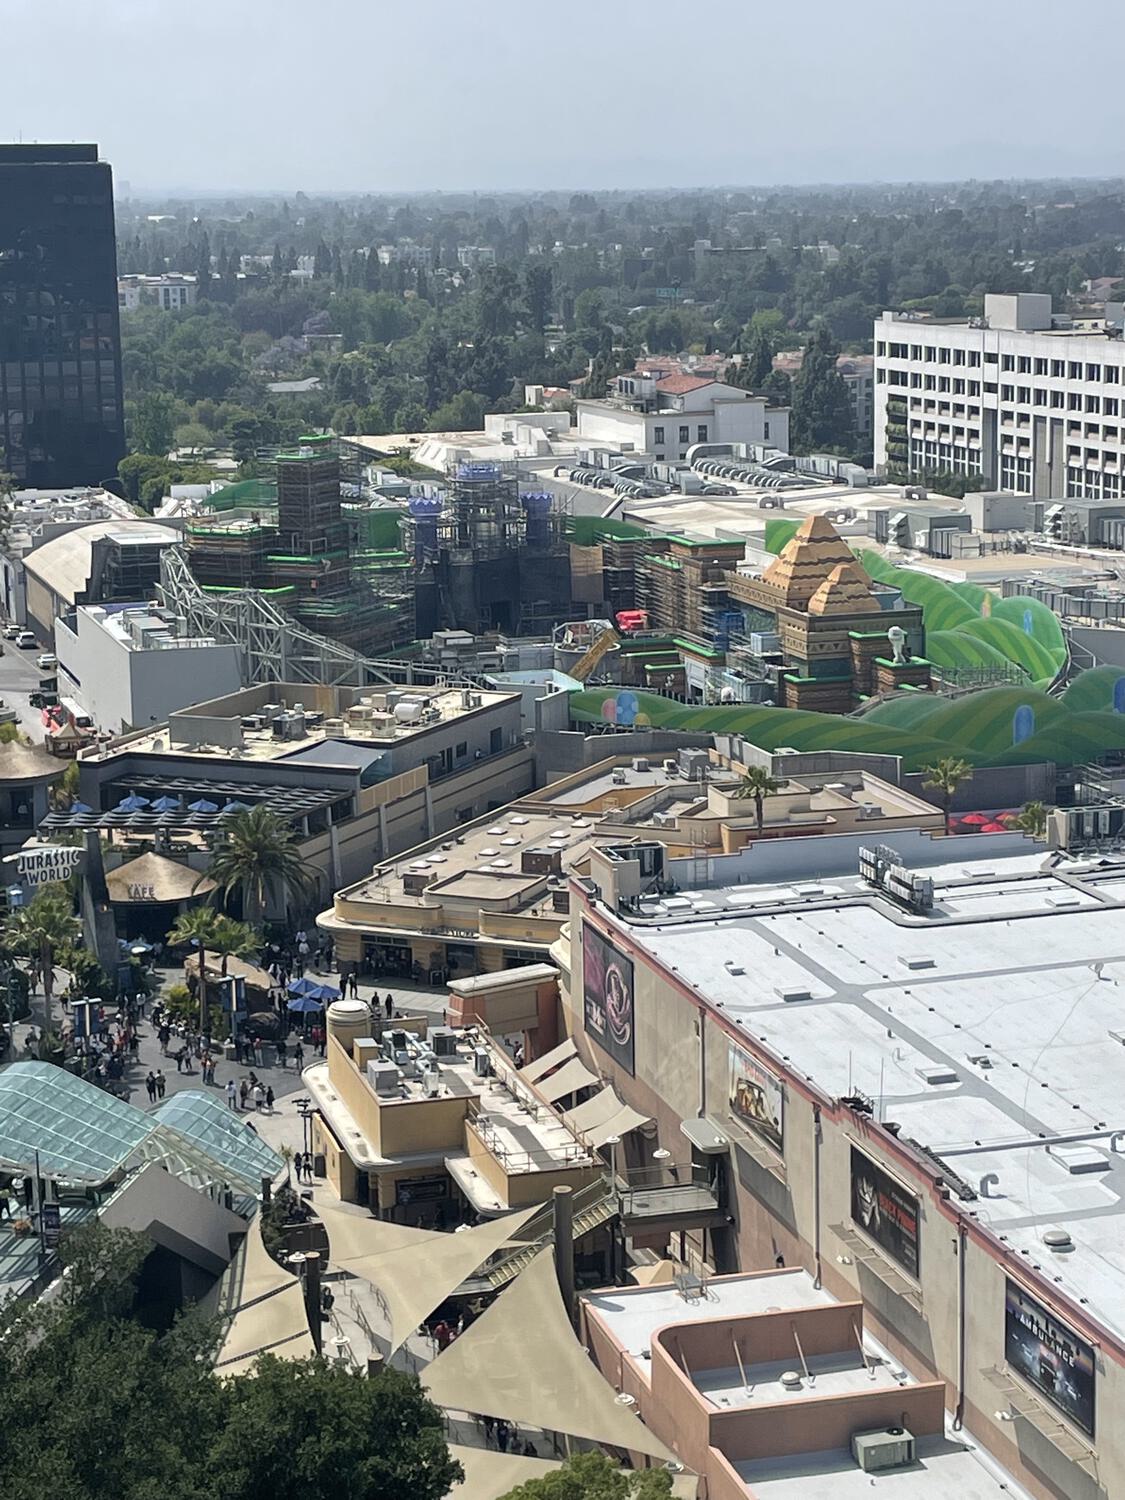 An overhead view of the lower lot at Universal Studios Hollywood, the unfinished Super Nintendo World visible in the distance